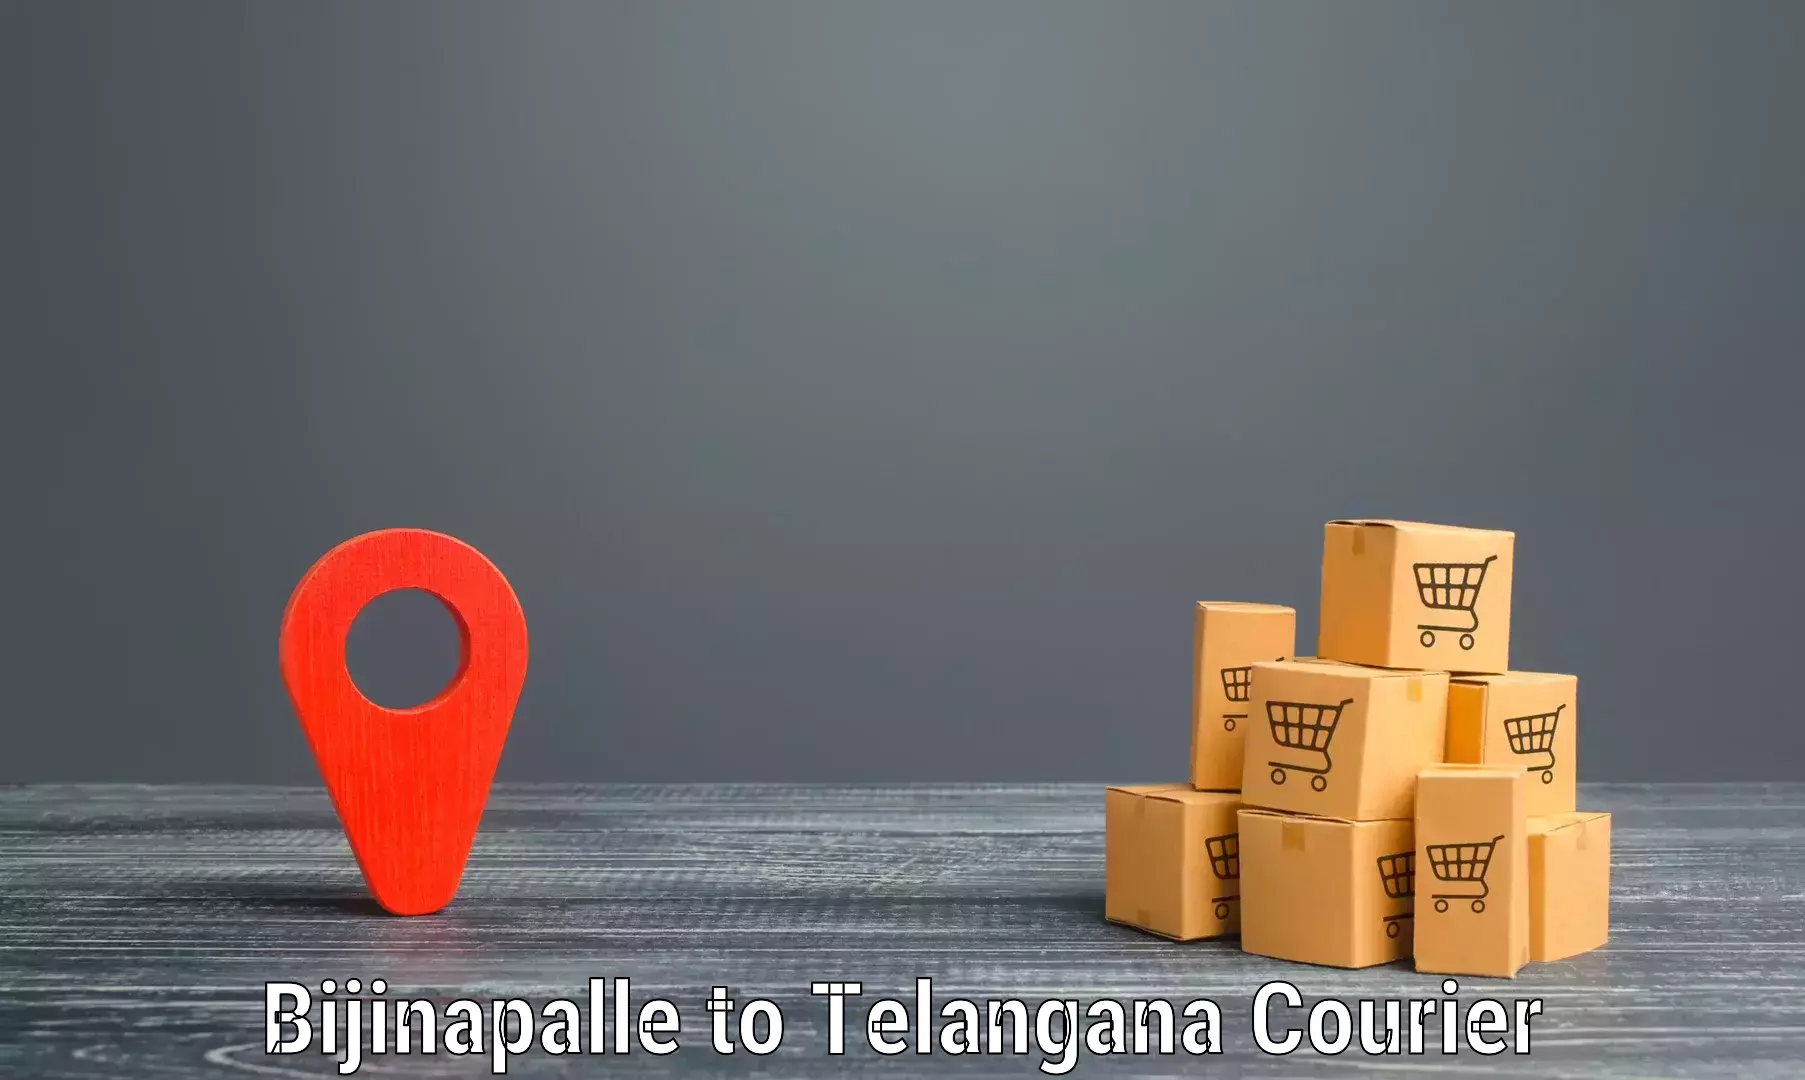 Courier service partnerships Bijinapalle to Bodhan